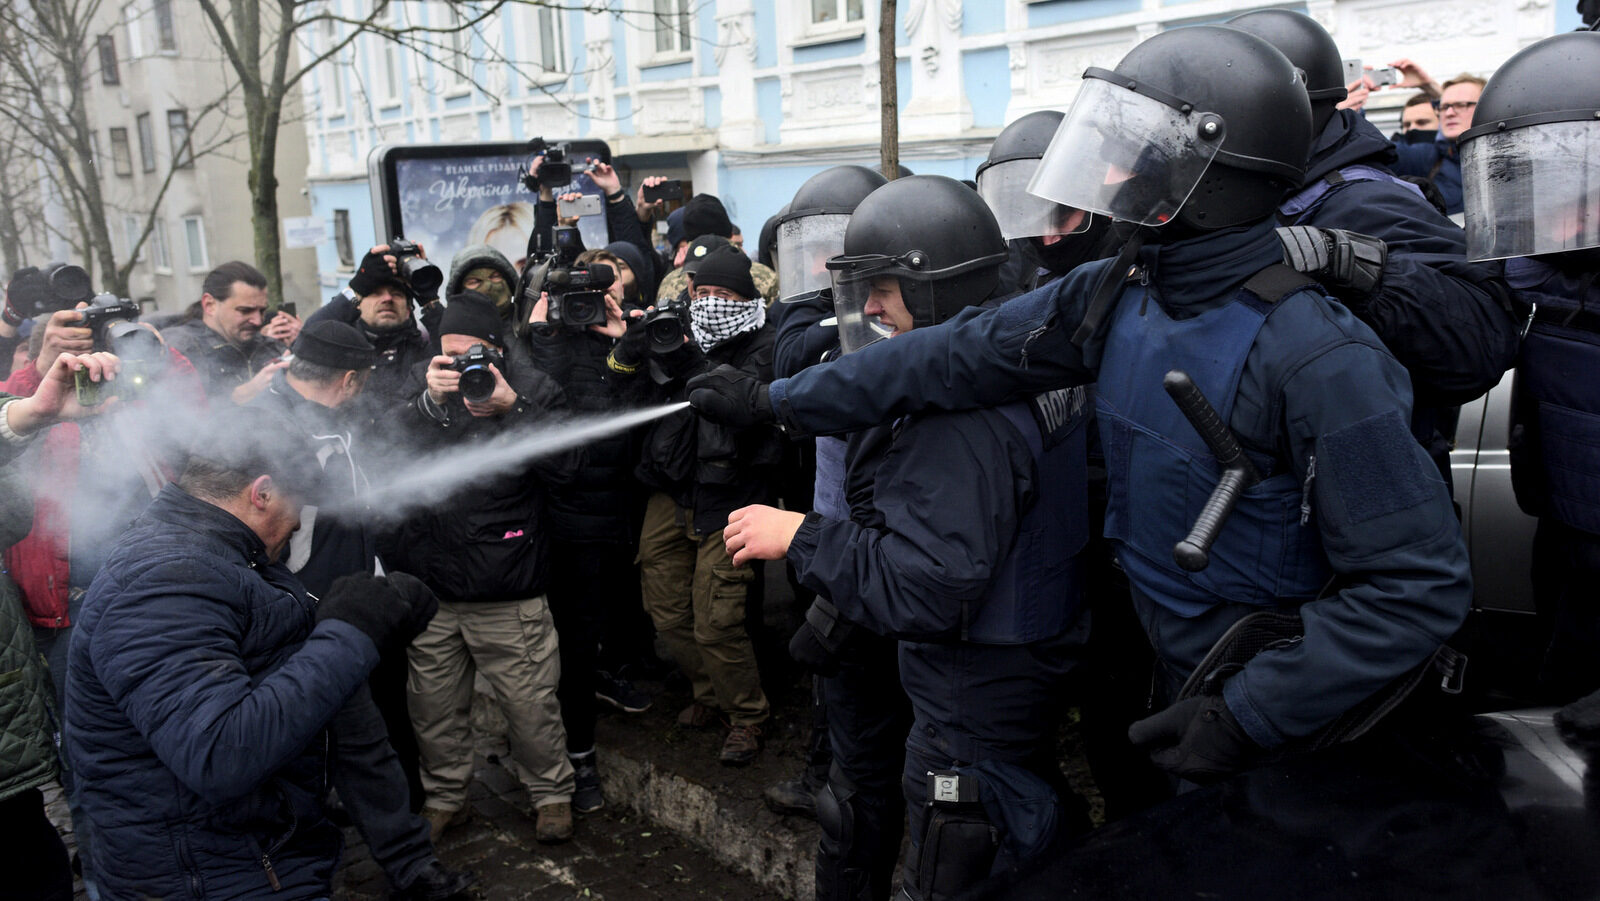 Police use tear gas as they clash with supporters of former Georgian president Mikheil Saakashvili in Kiev, Ukraine, Dec. 5, 2017. Hundreds of protesters chanting "Kiev, rise up!" blocked Ukrainian police as they tried to arrest former Georgian president Mikheil Saakashvili on Tuesday. (AP/Evgeniy Maloletka)